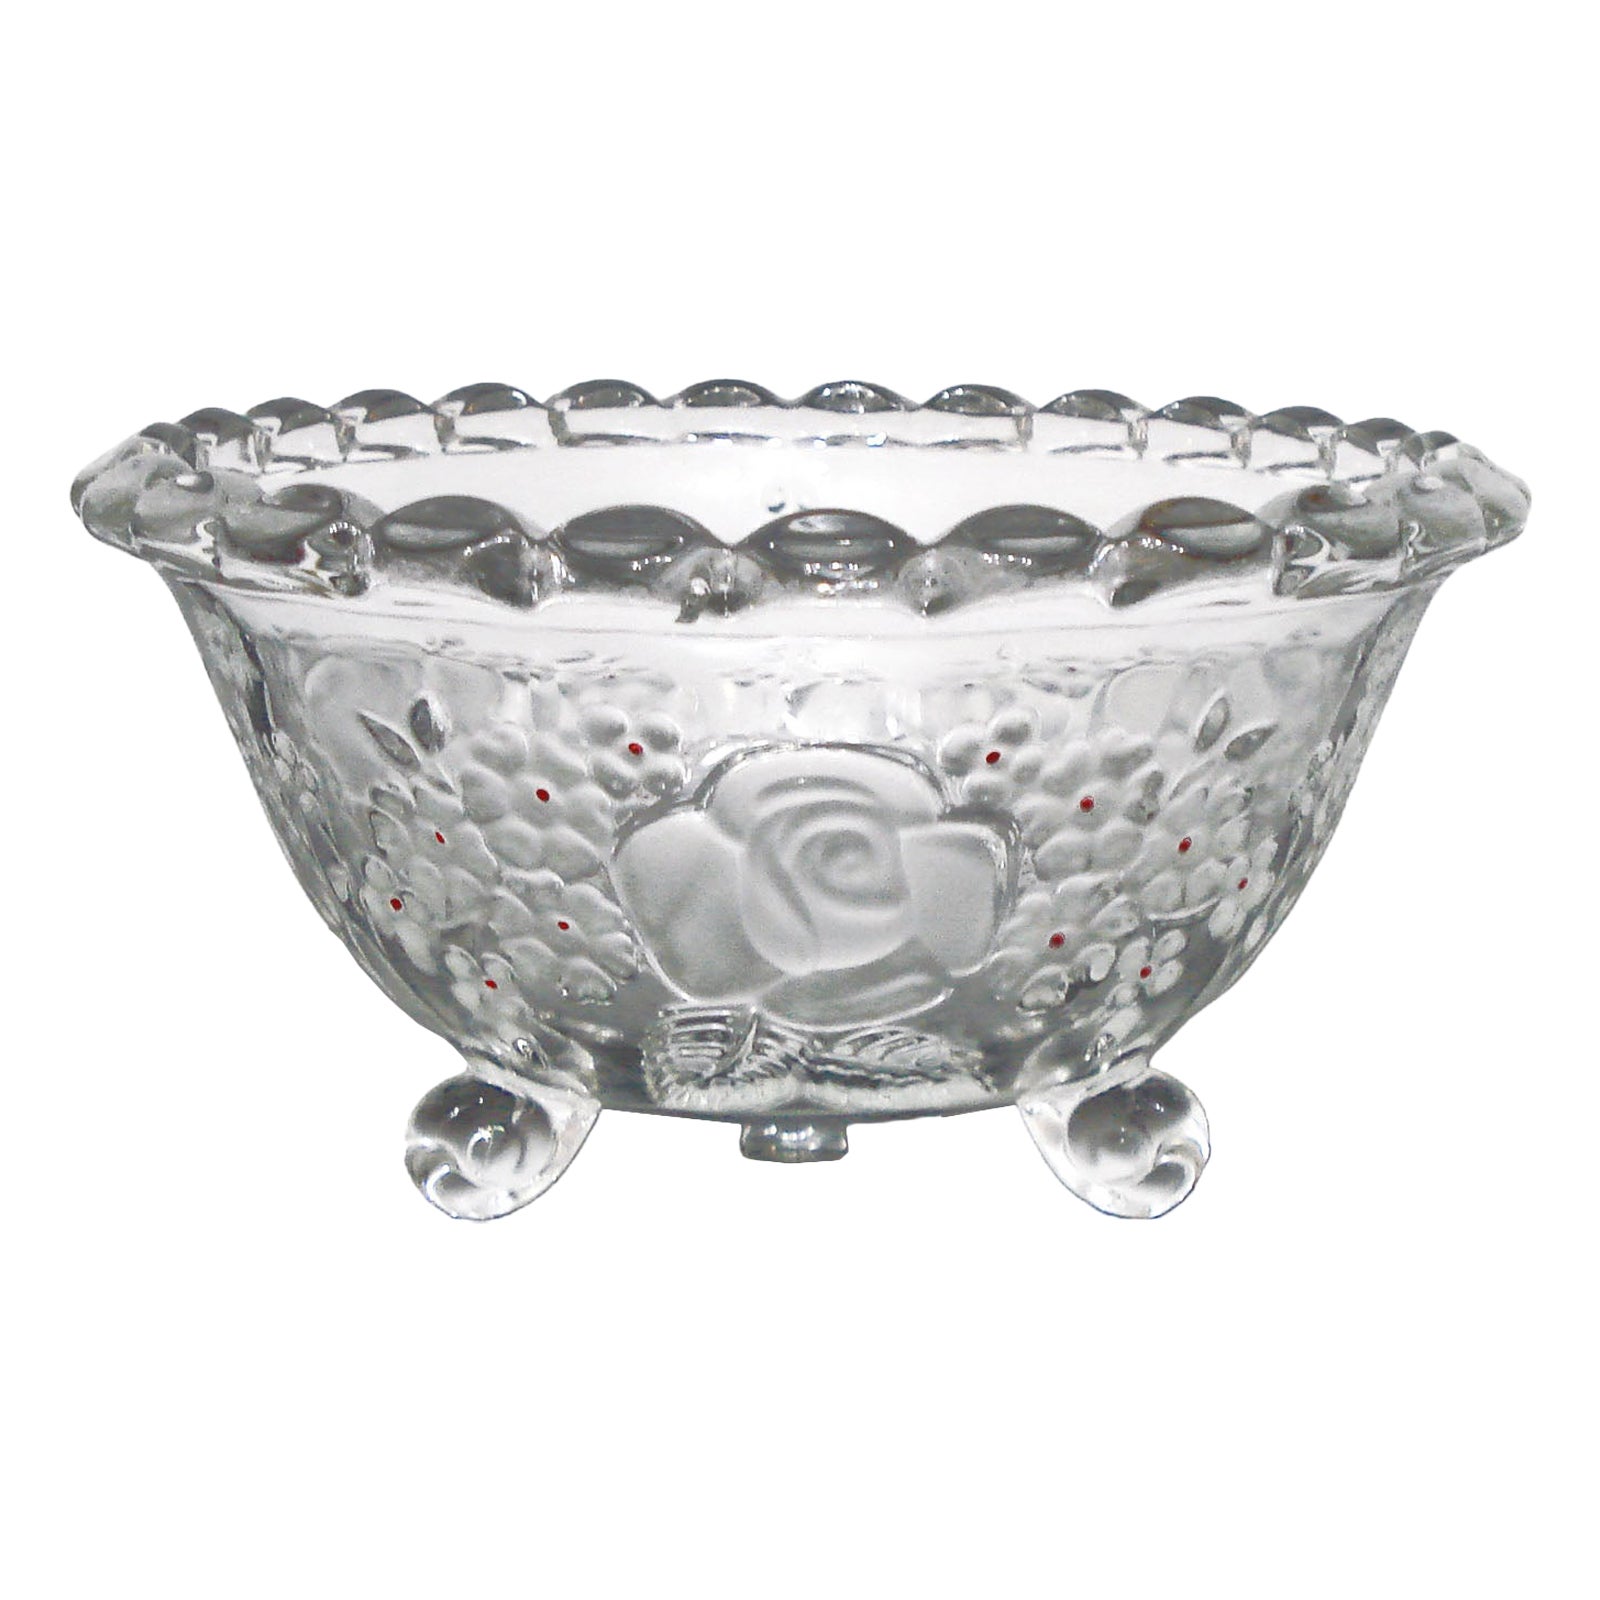 Fabulous Mid-Century Glass Bowl Floral Décor with Red Enamel Accents